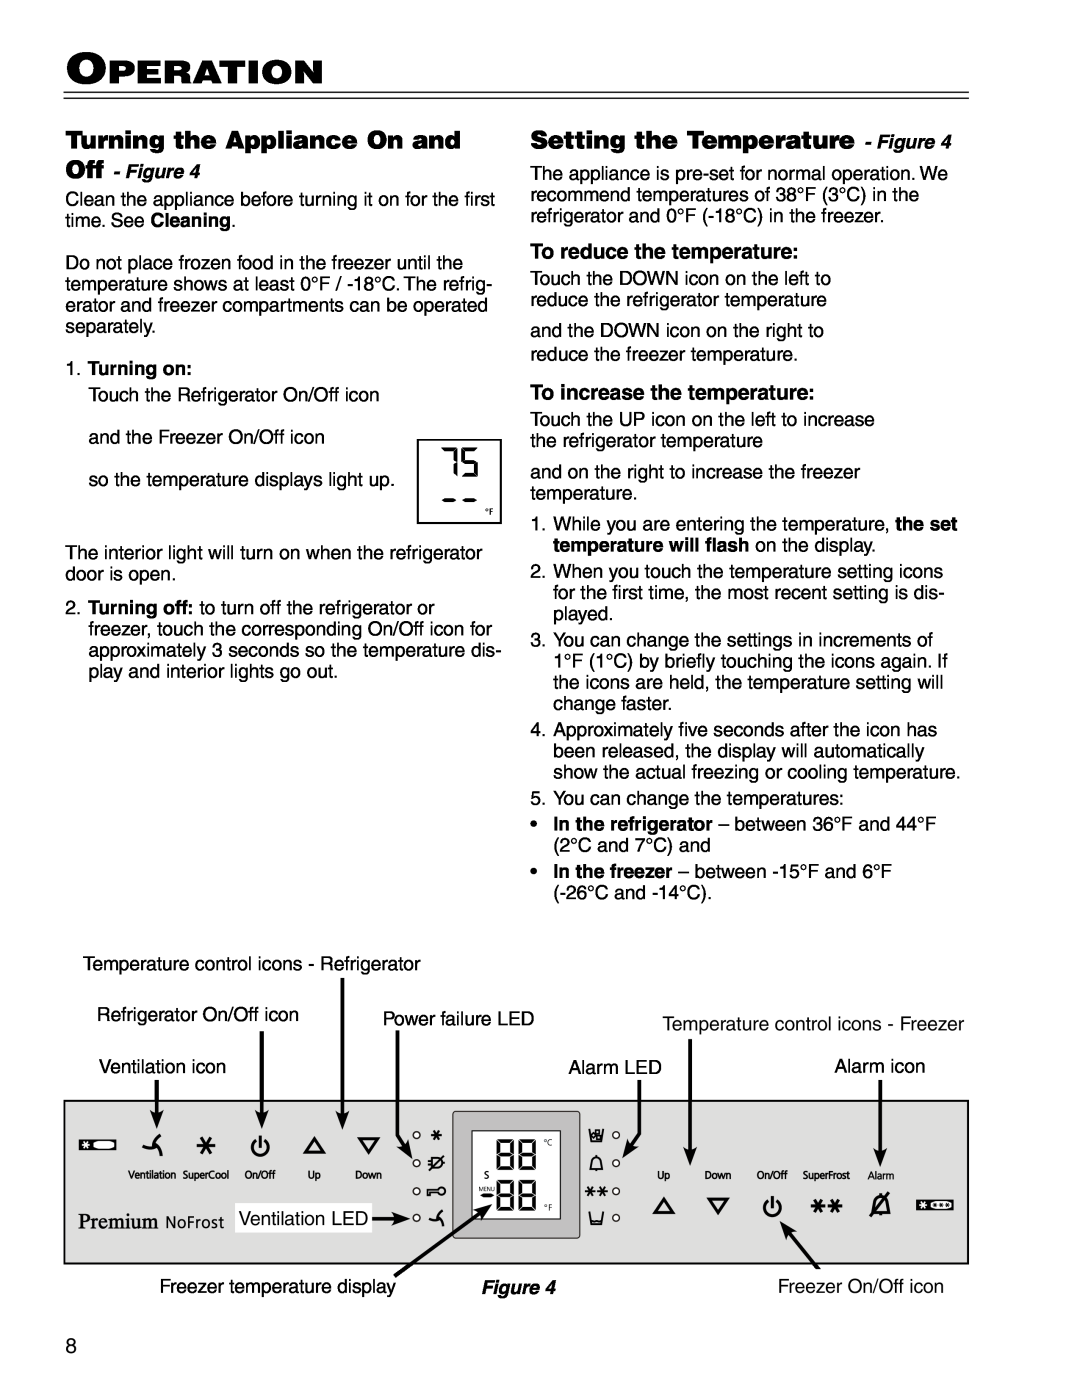 Liebherr CS 1640 7082 481-01 manual Operation, Turning the Appliance On and, Setting the Temperature - Figure, Off - Figure 